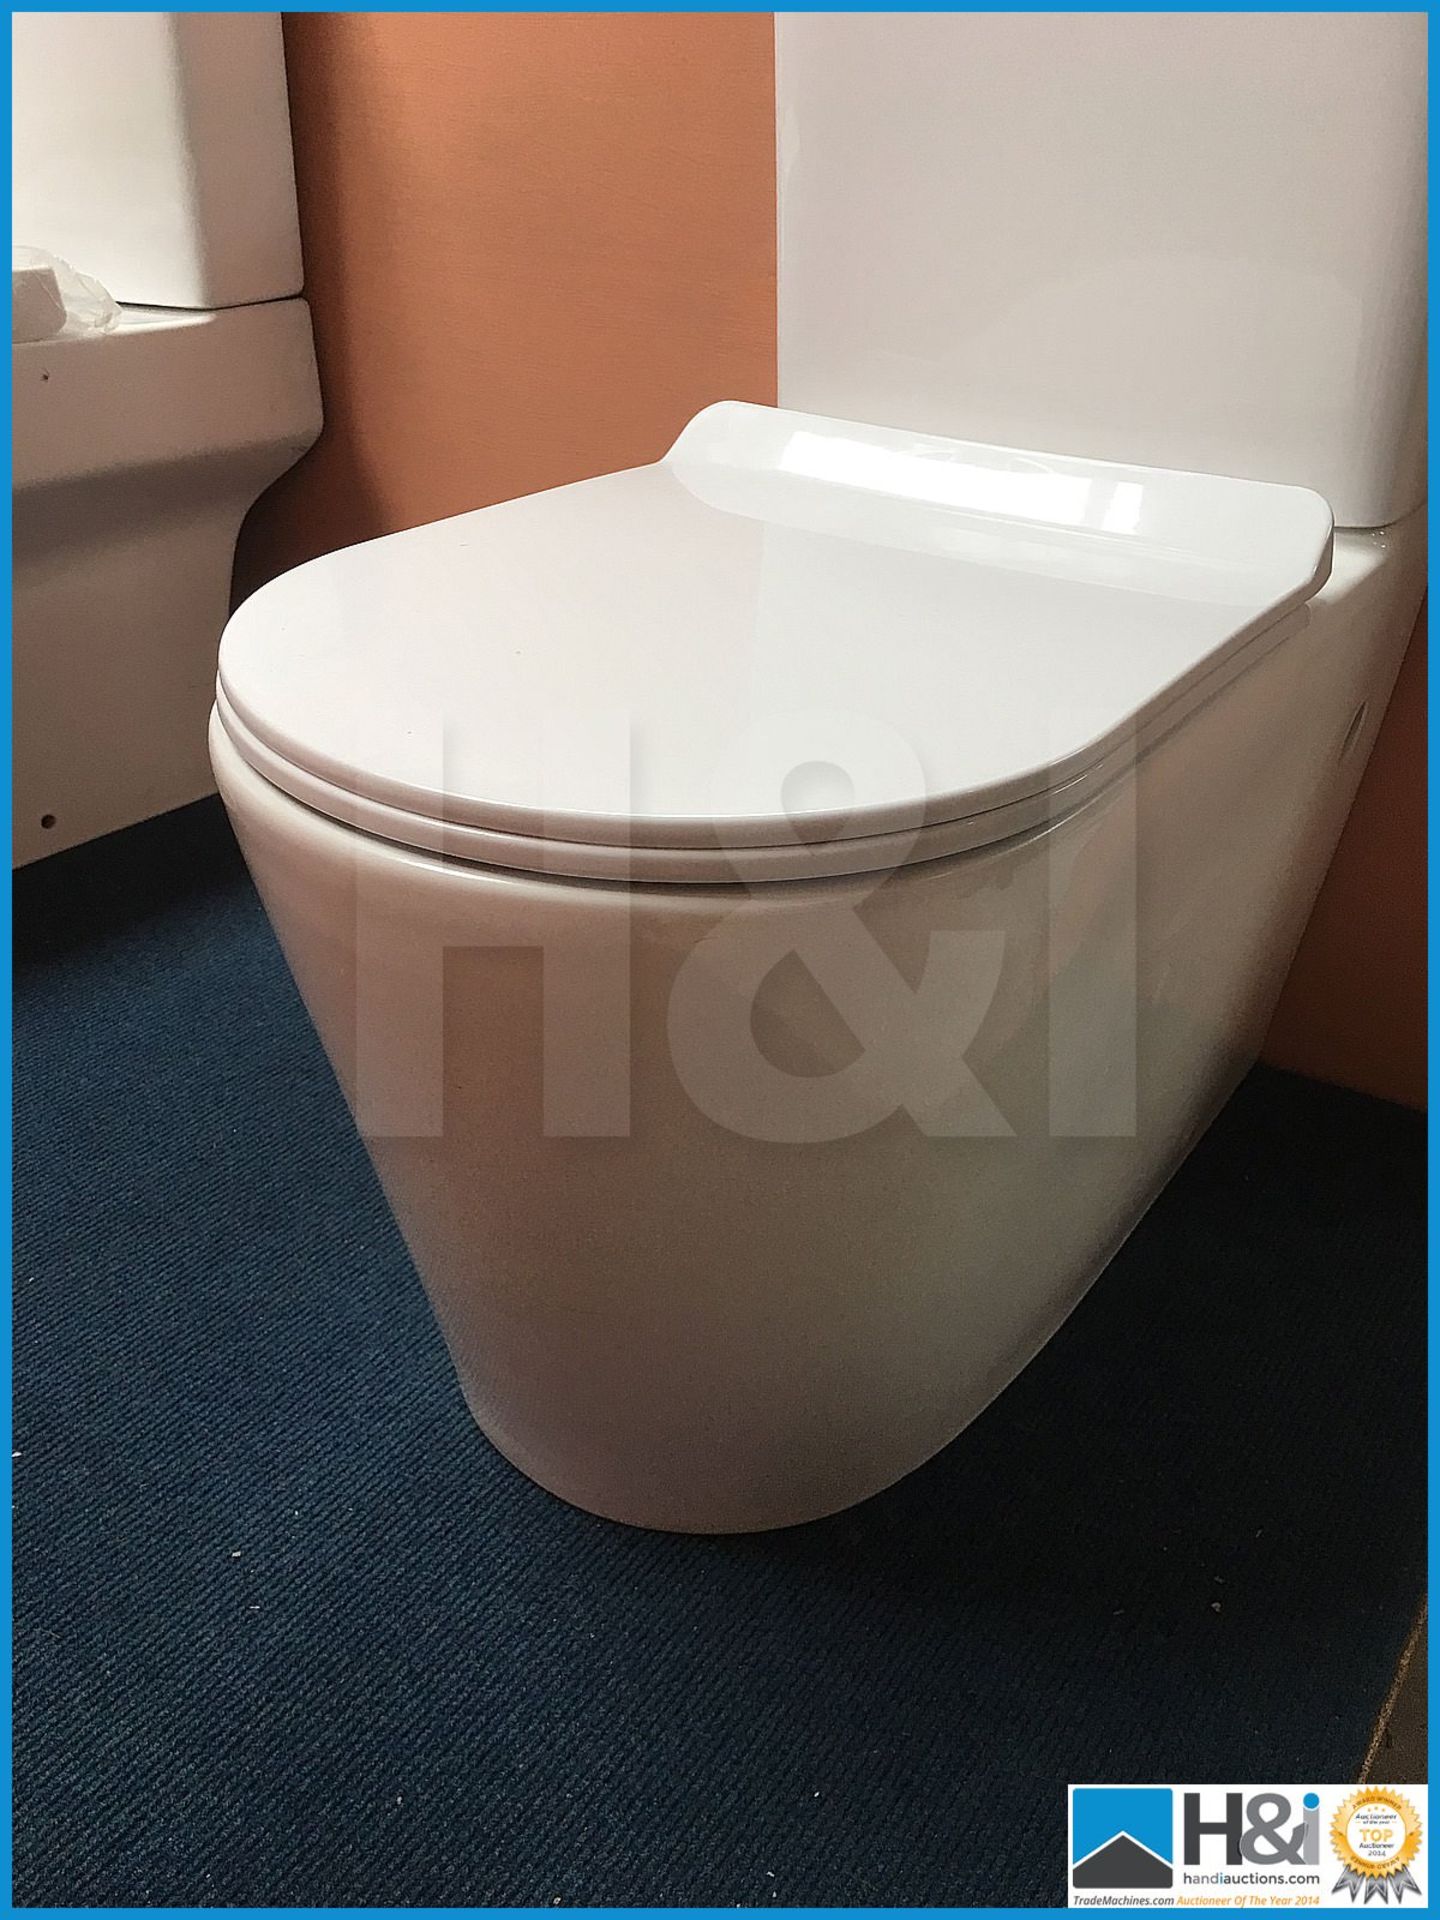 Designer K008 full fascia WC with complimenting thin sandwich soft close seat compete with valve mec - Image 2 of 4